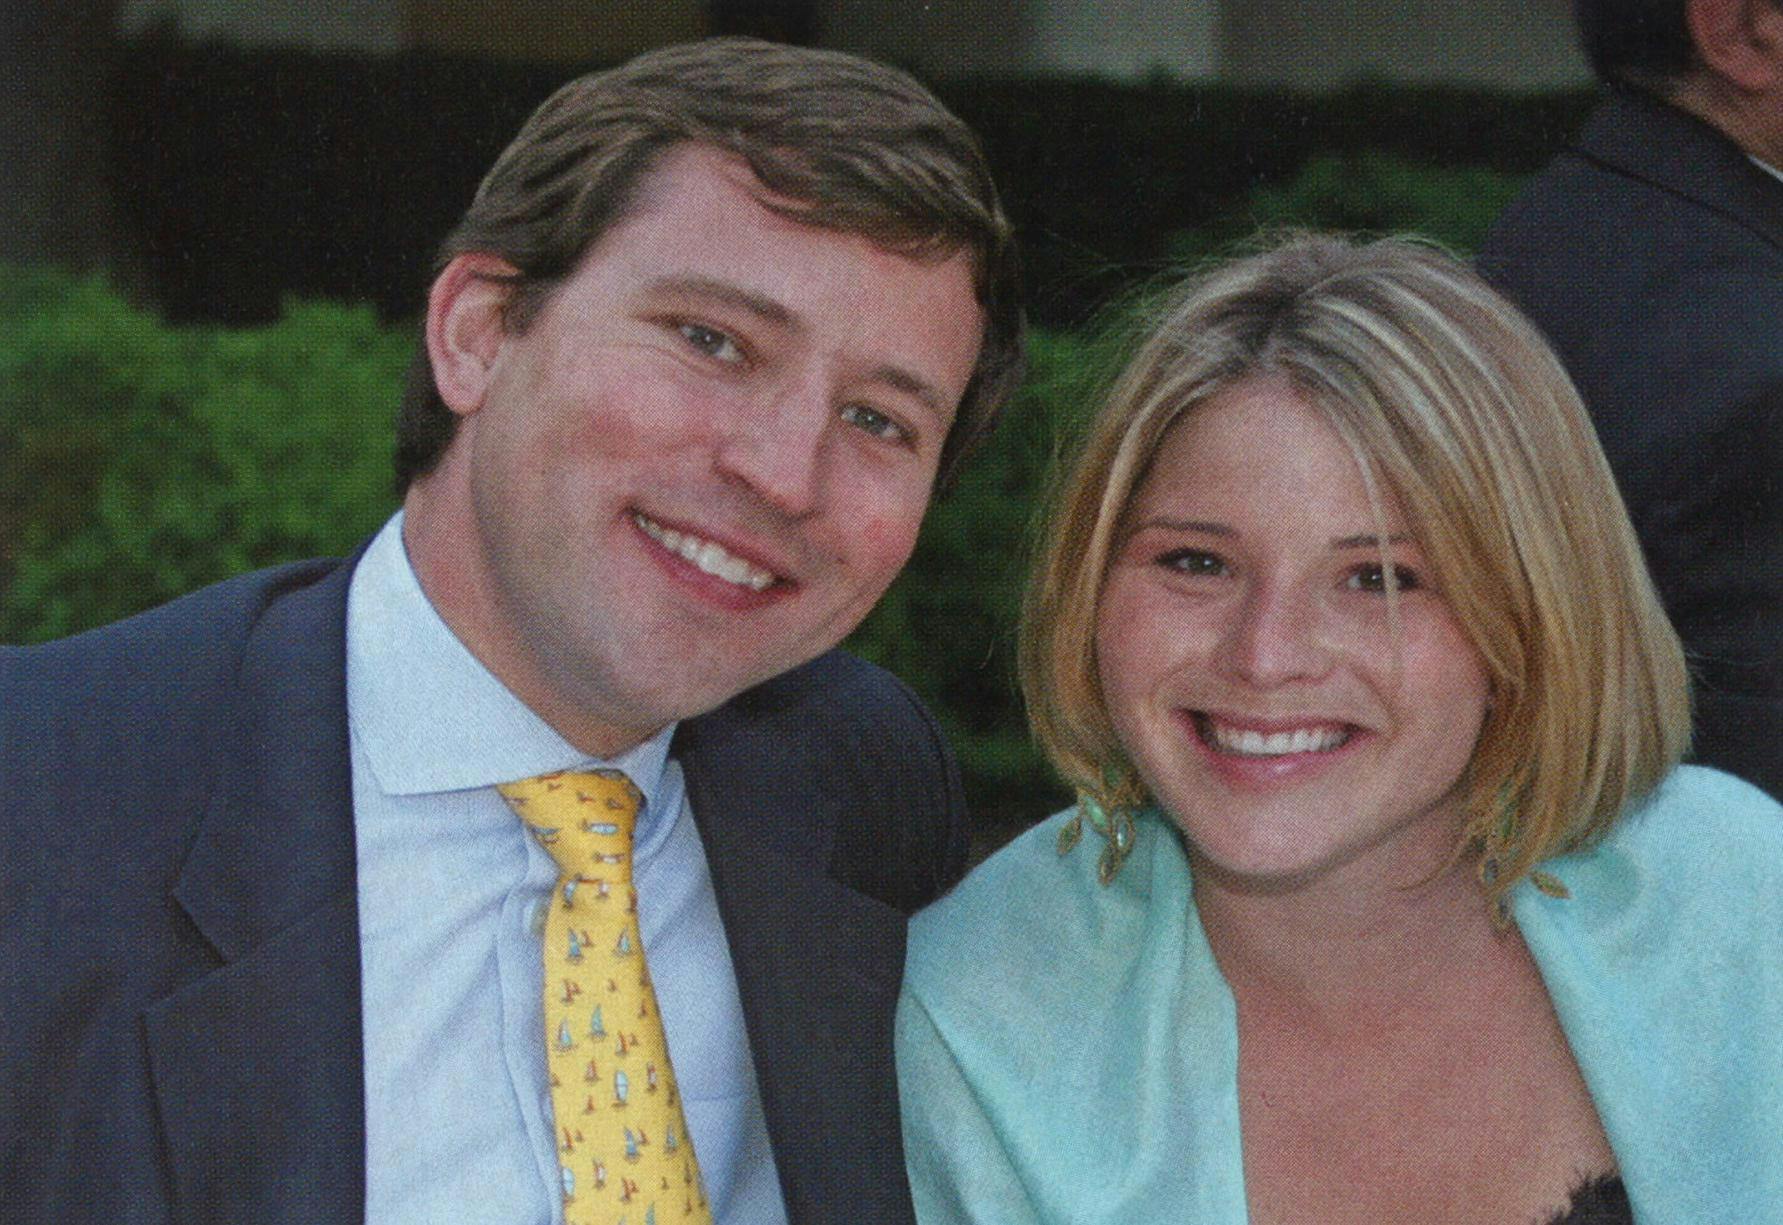 Jenna with her fiance, Henry Hager, in 2006.